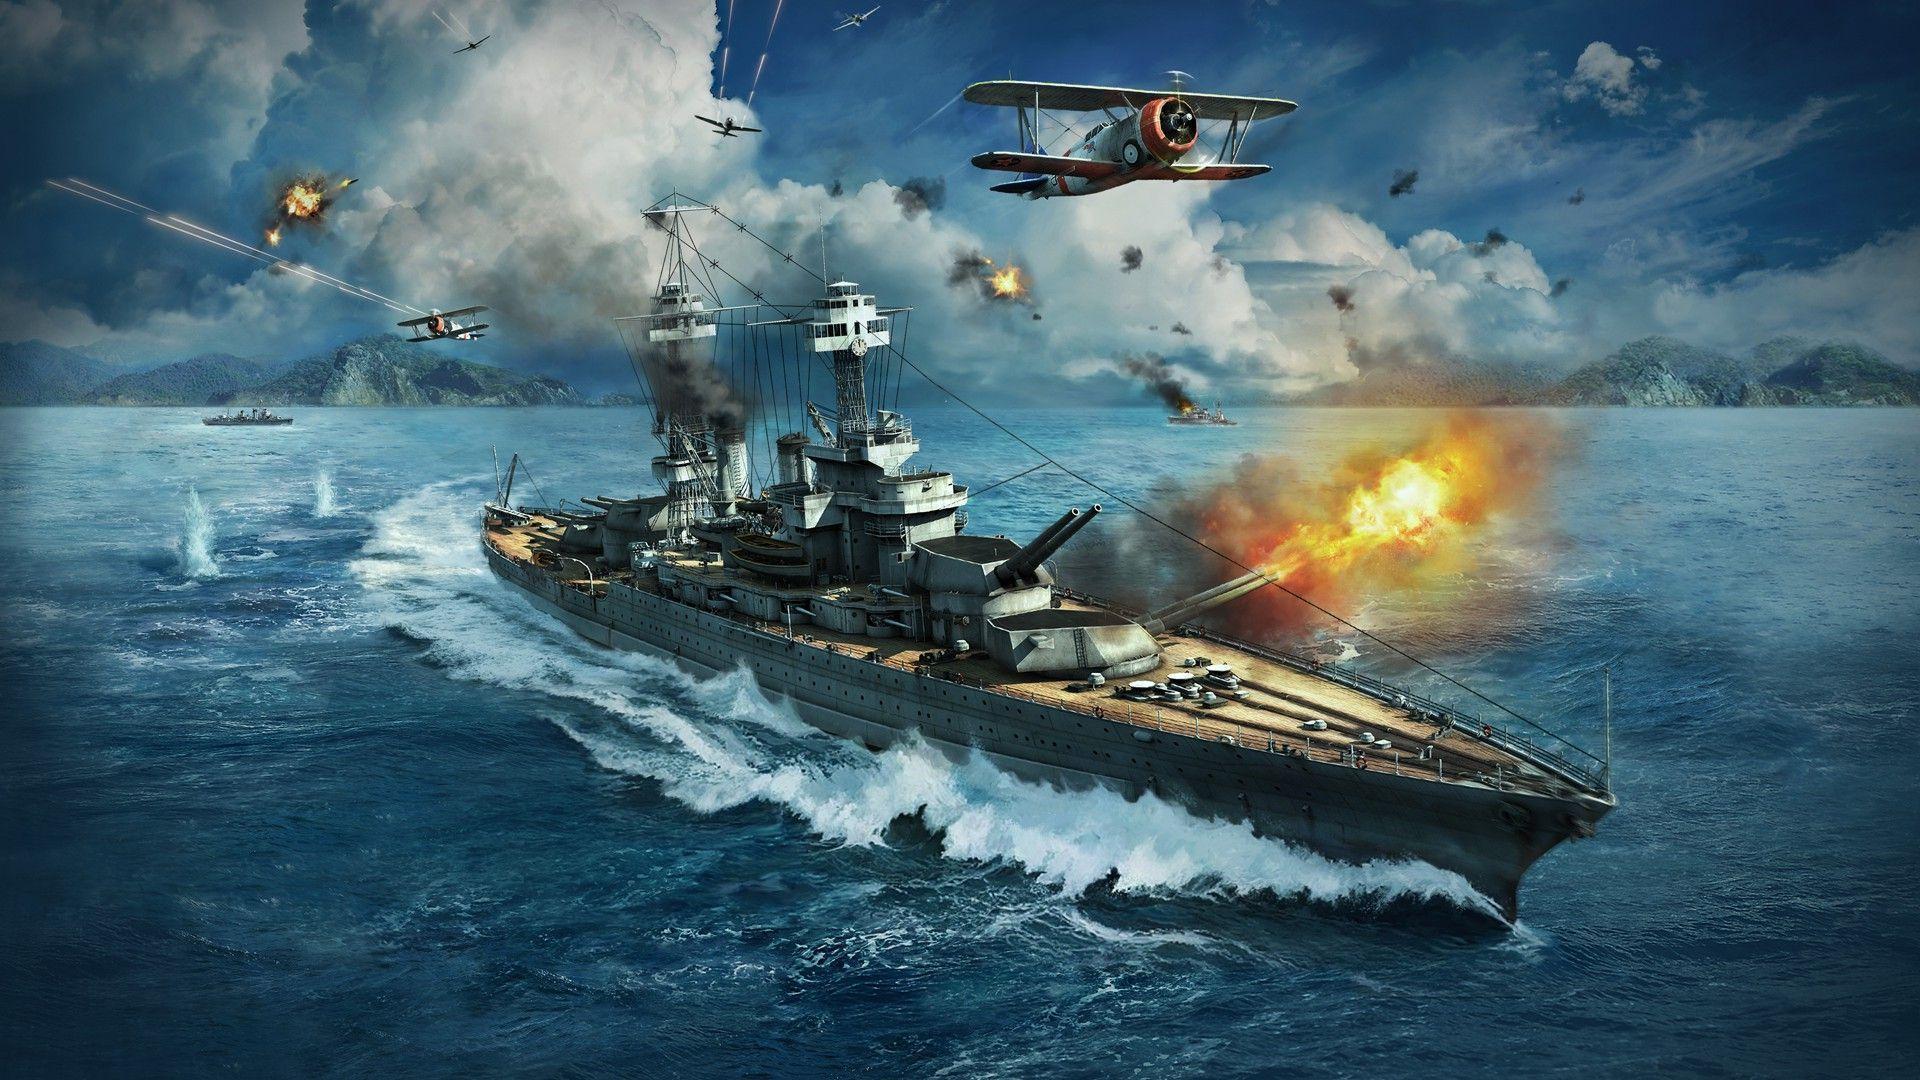 More American Ships Make Their Way Into World Of Warships Legends